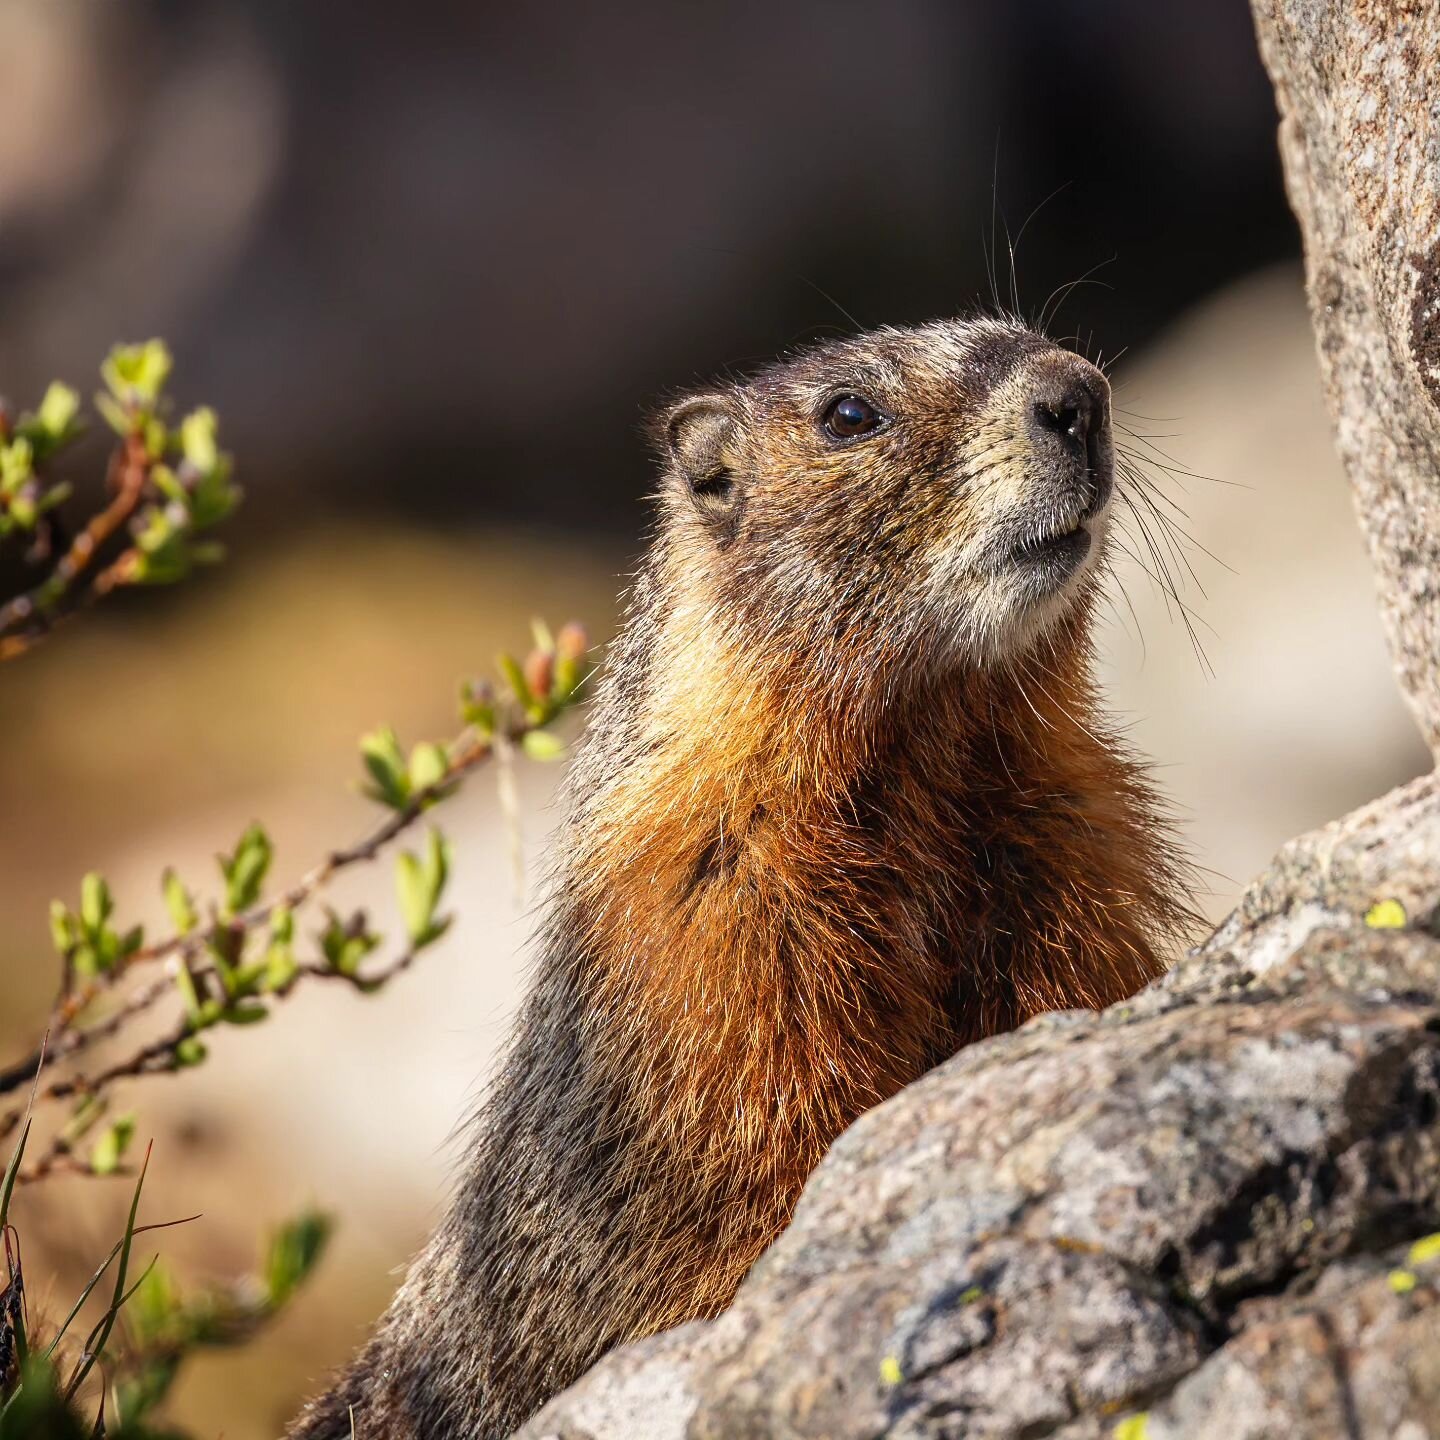 This cute little marmot kept getting into our gear so we had to hang everything in the trees... Not that it couldn't get into the trees but it's the best we could do.

#wyoming #windriver #windriverrange #winds #wilderness #wildernessarea  #wildernes